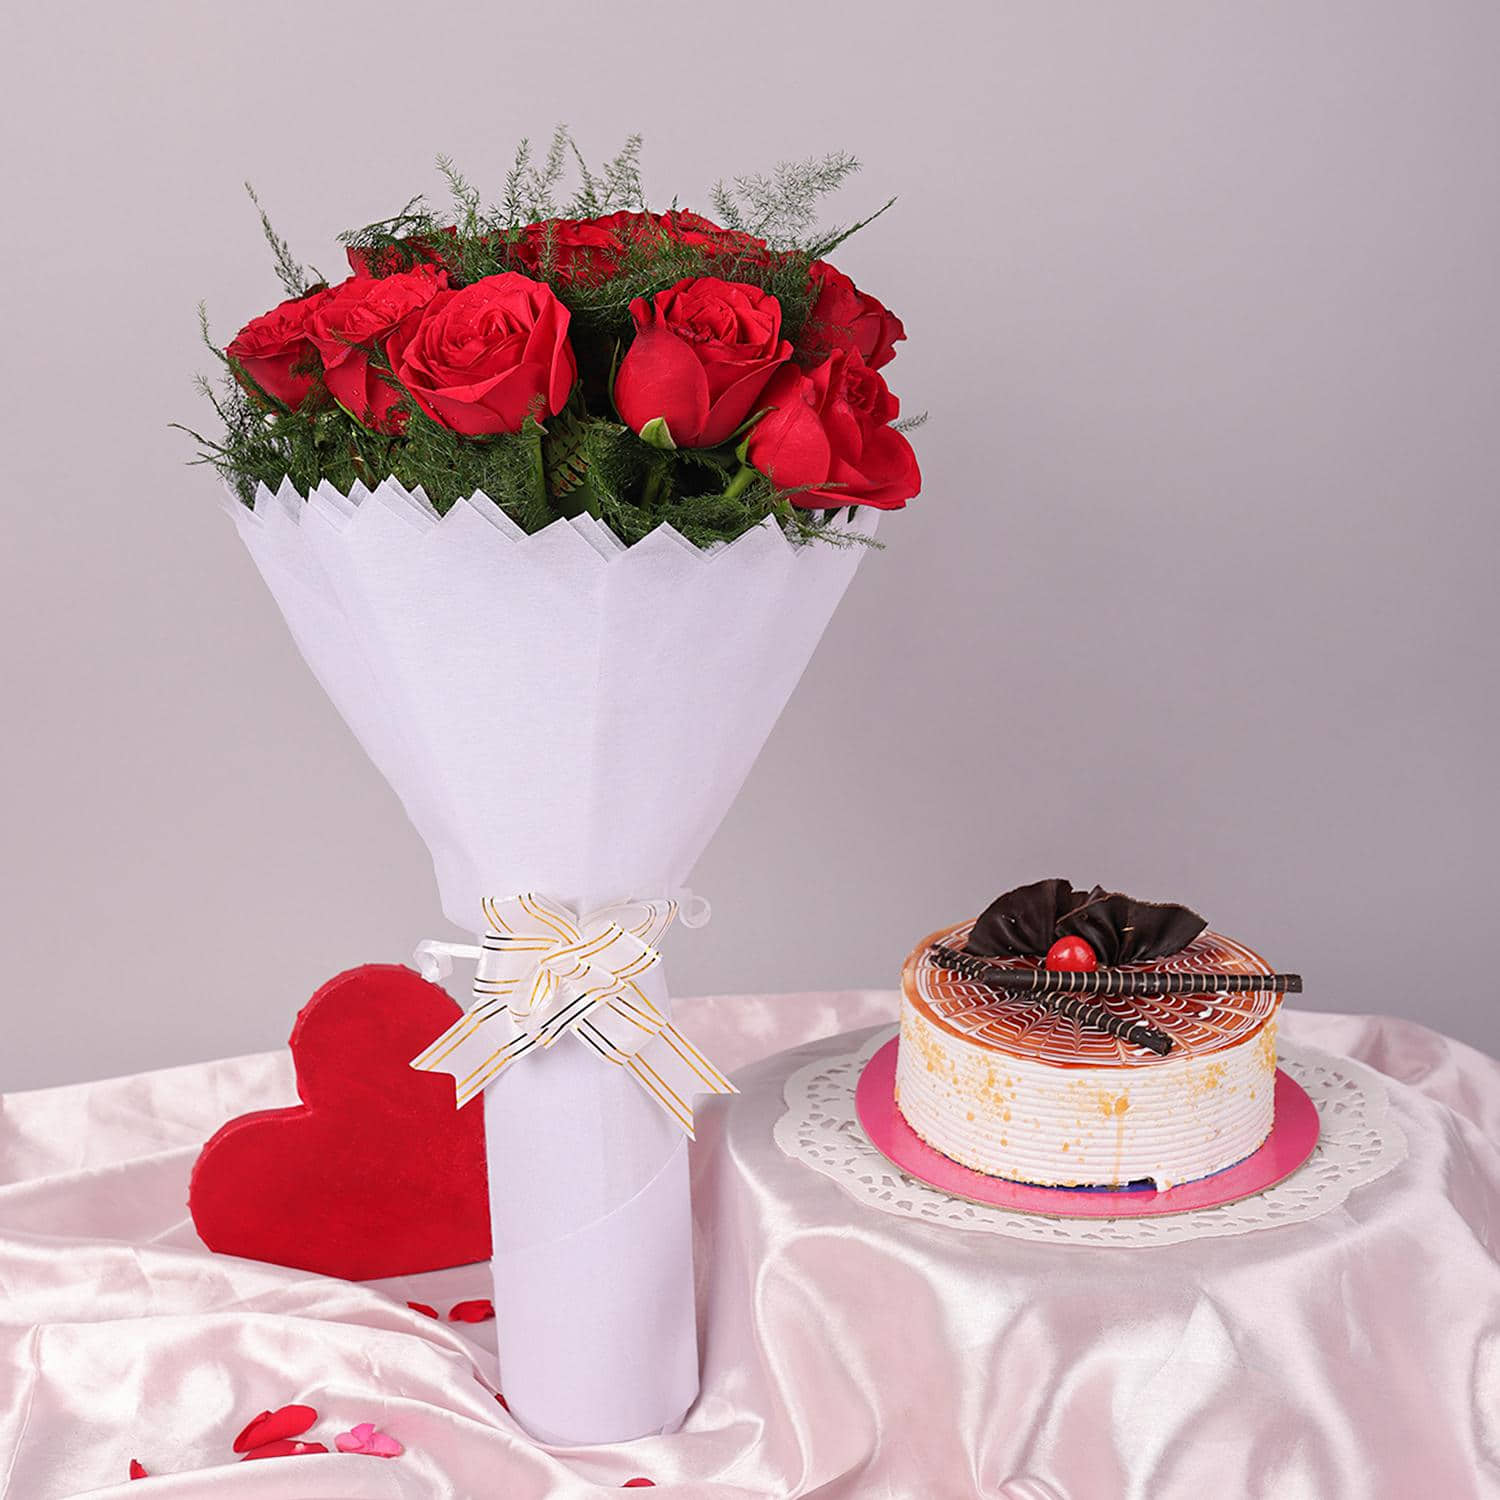 The Pink Bouquet Cake